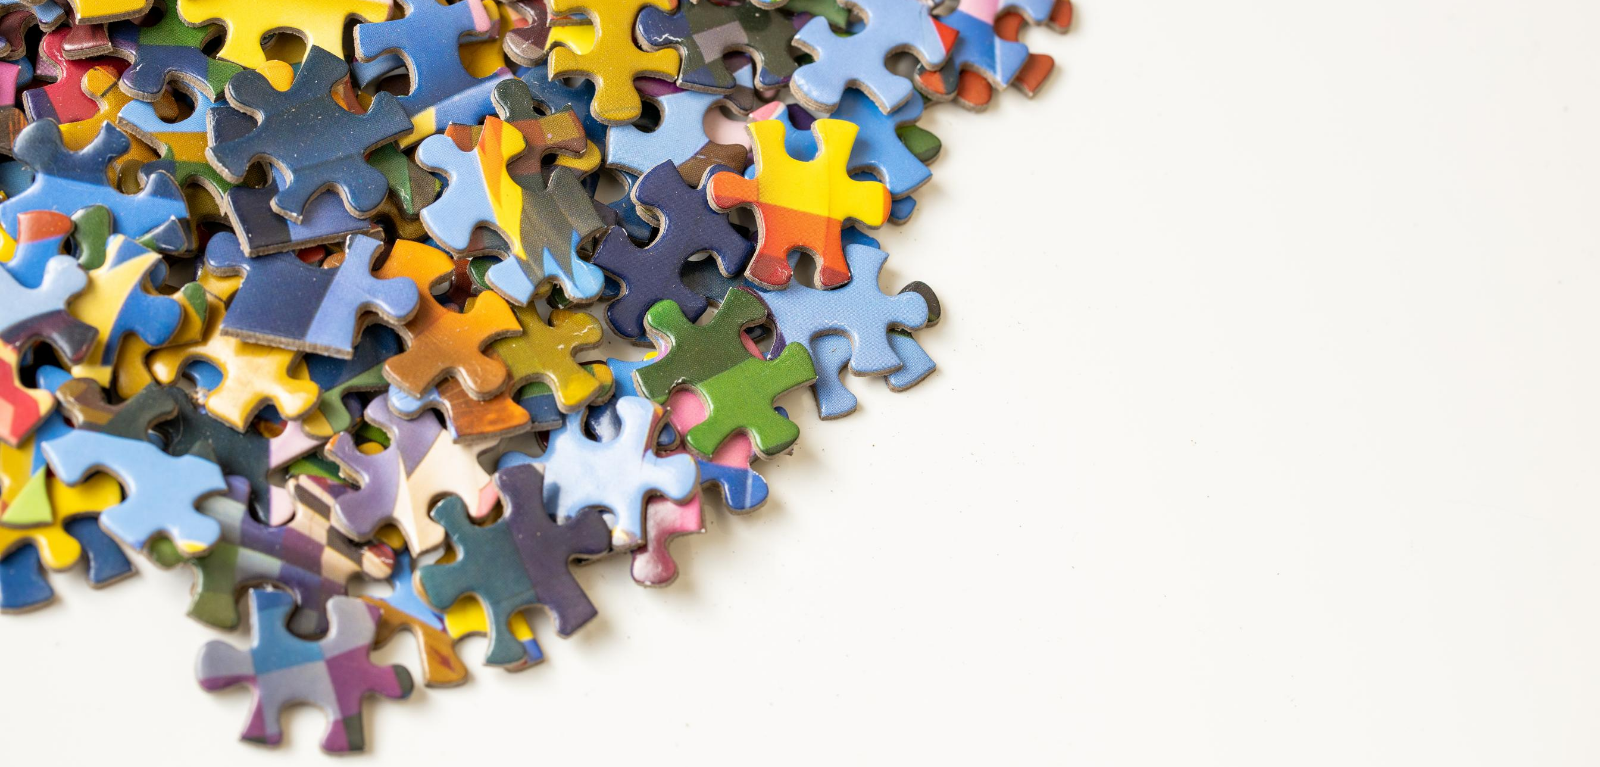 Photograph of multicoloured jigsaw puzzle pieces on white background